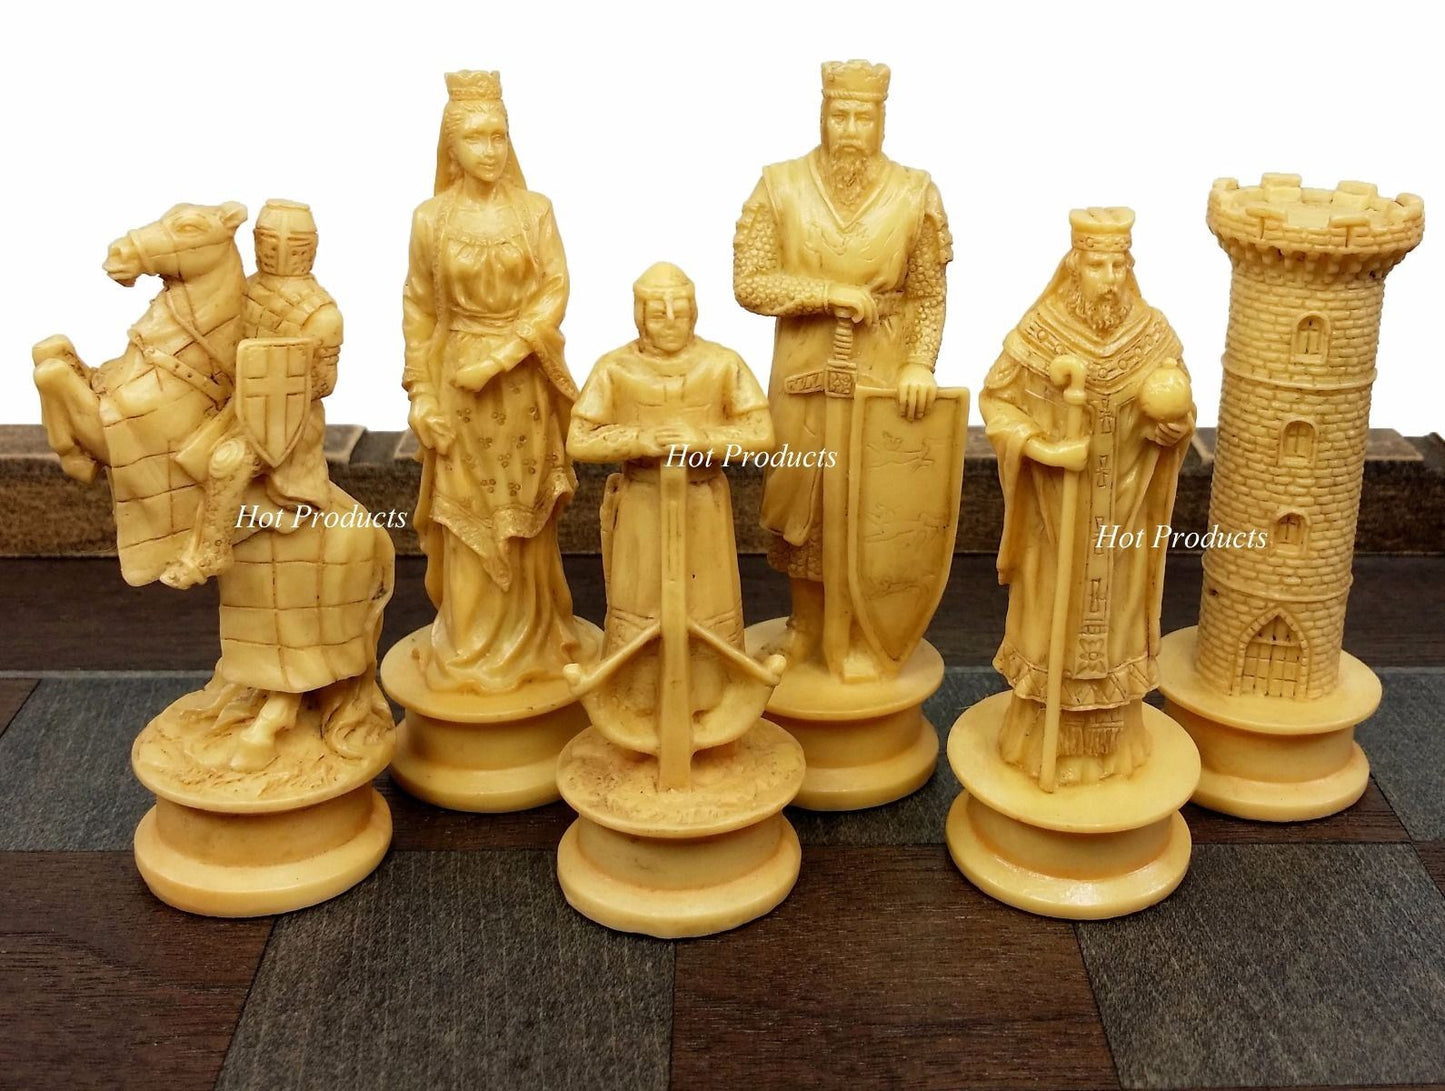 Medieval Times Crusades King Richard Chess Set Antique Color W/  Castle Board